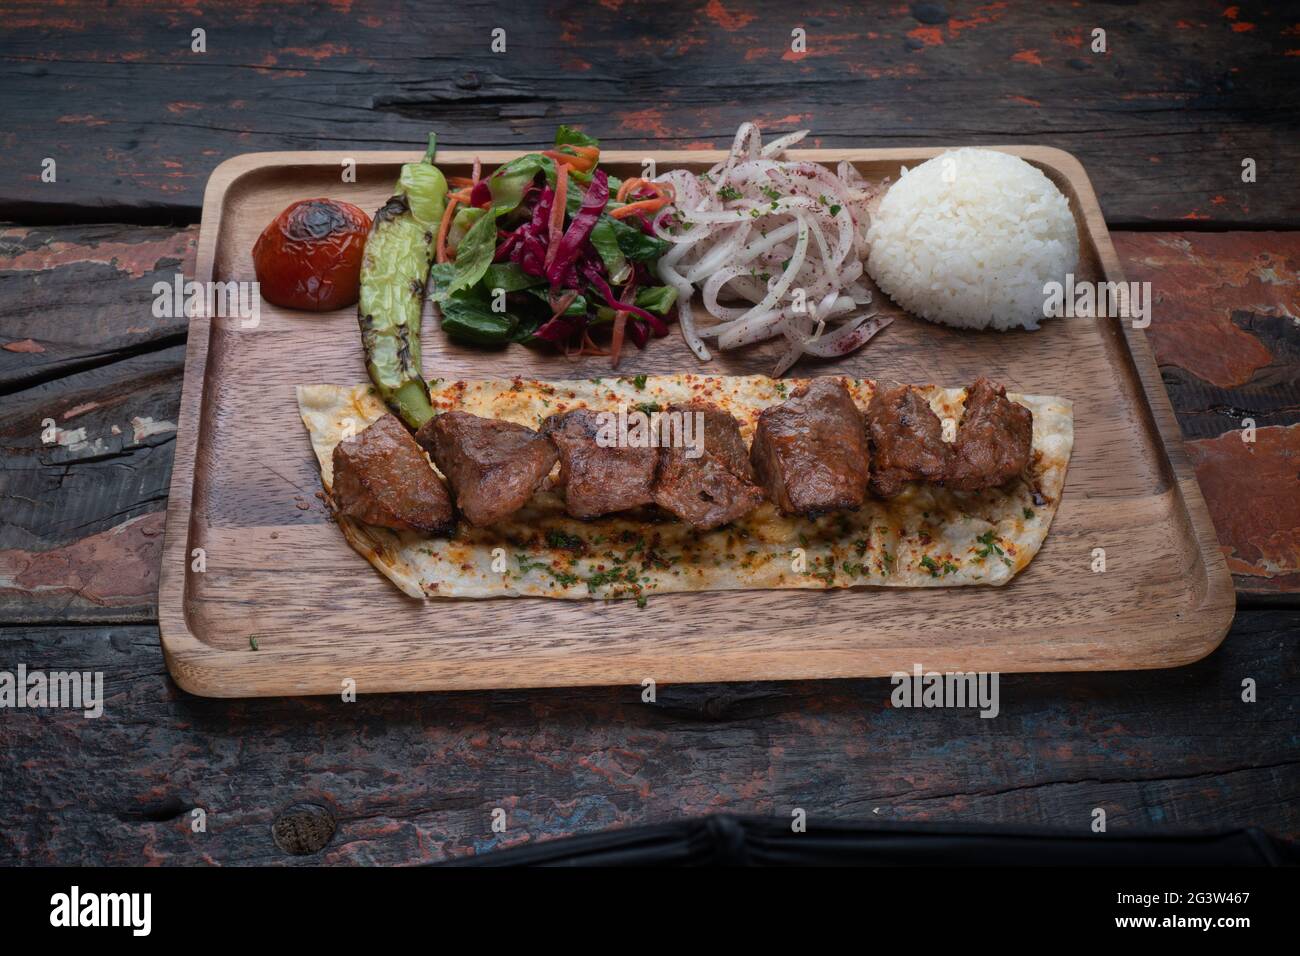 Turkish lamb sis kebab with rice and vegetables on rustic wooden table Stock Photo